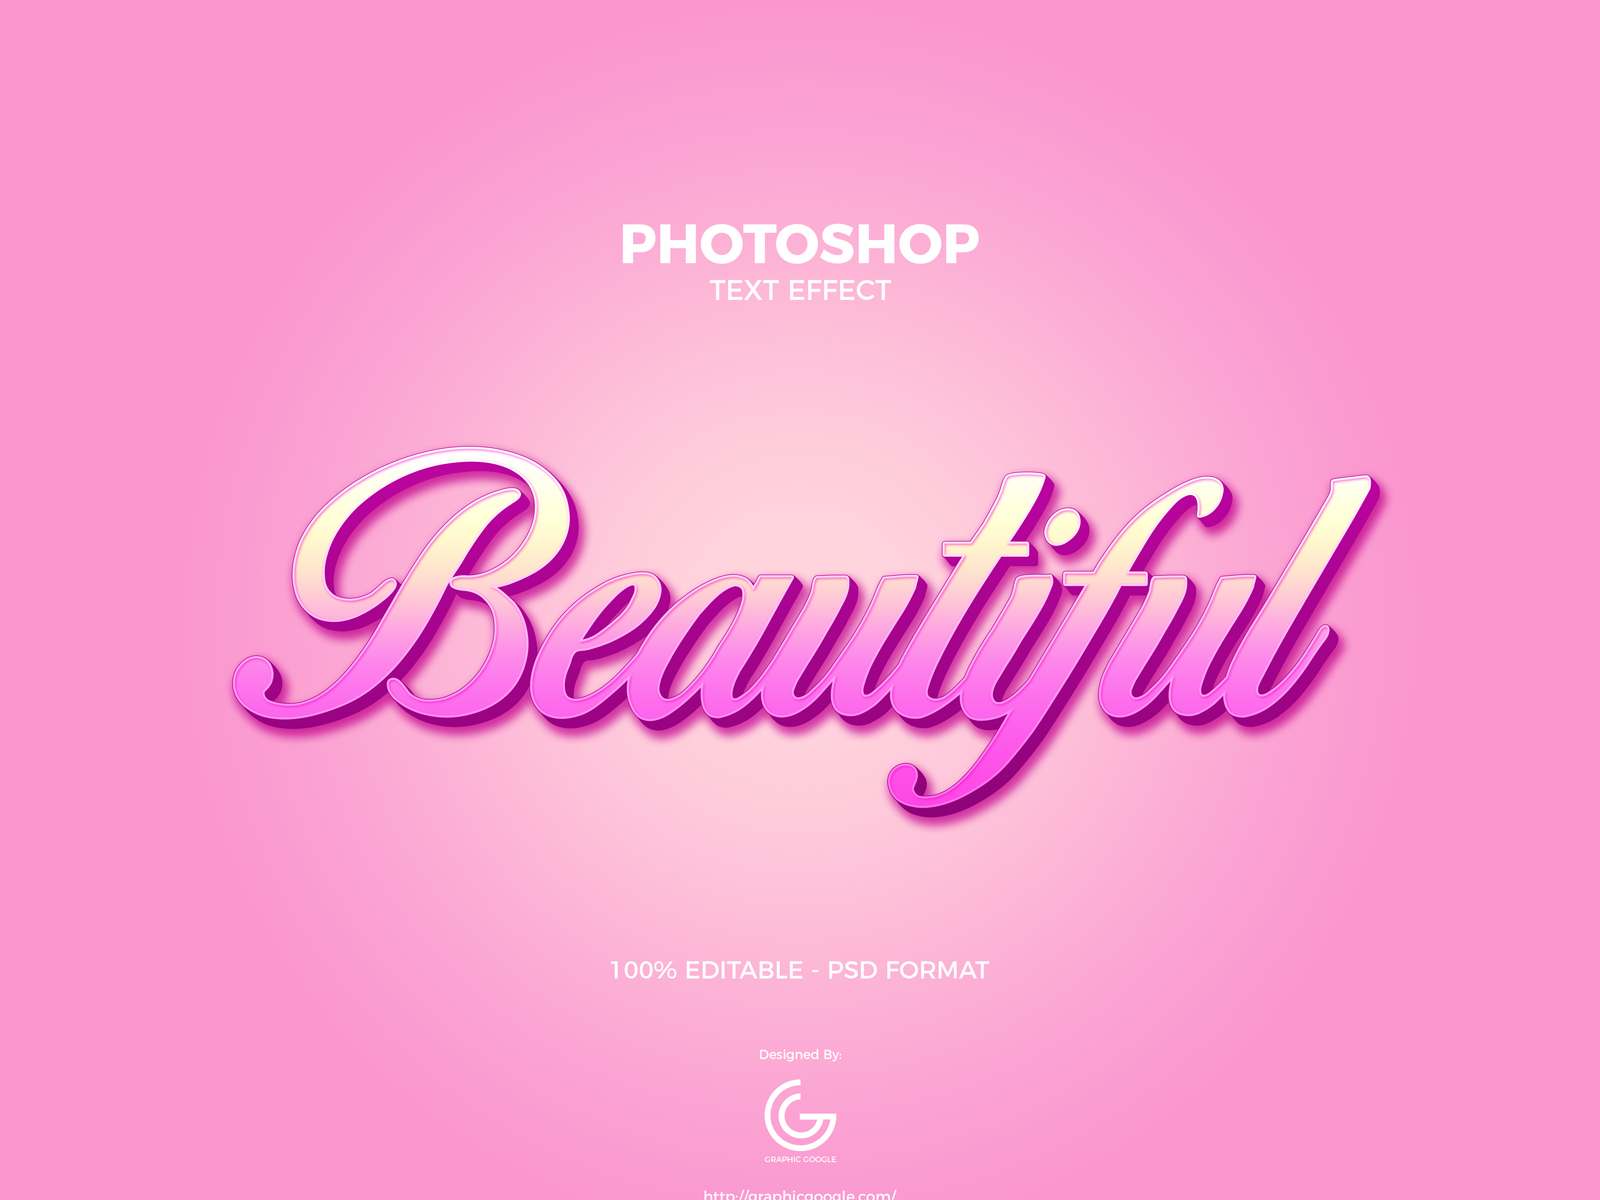 text for photoshop free download